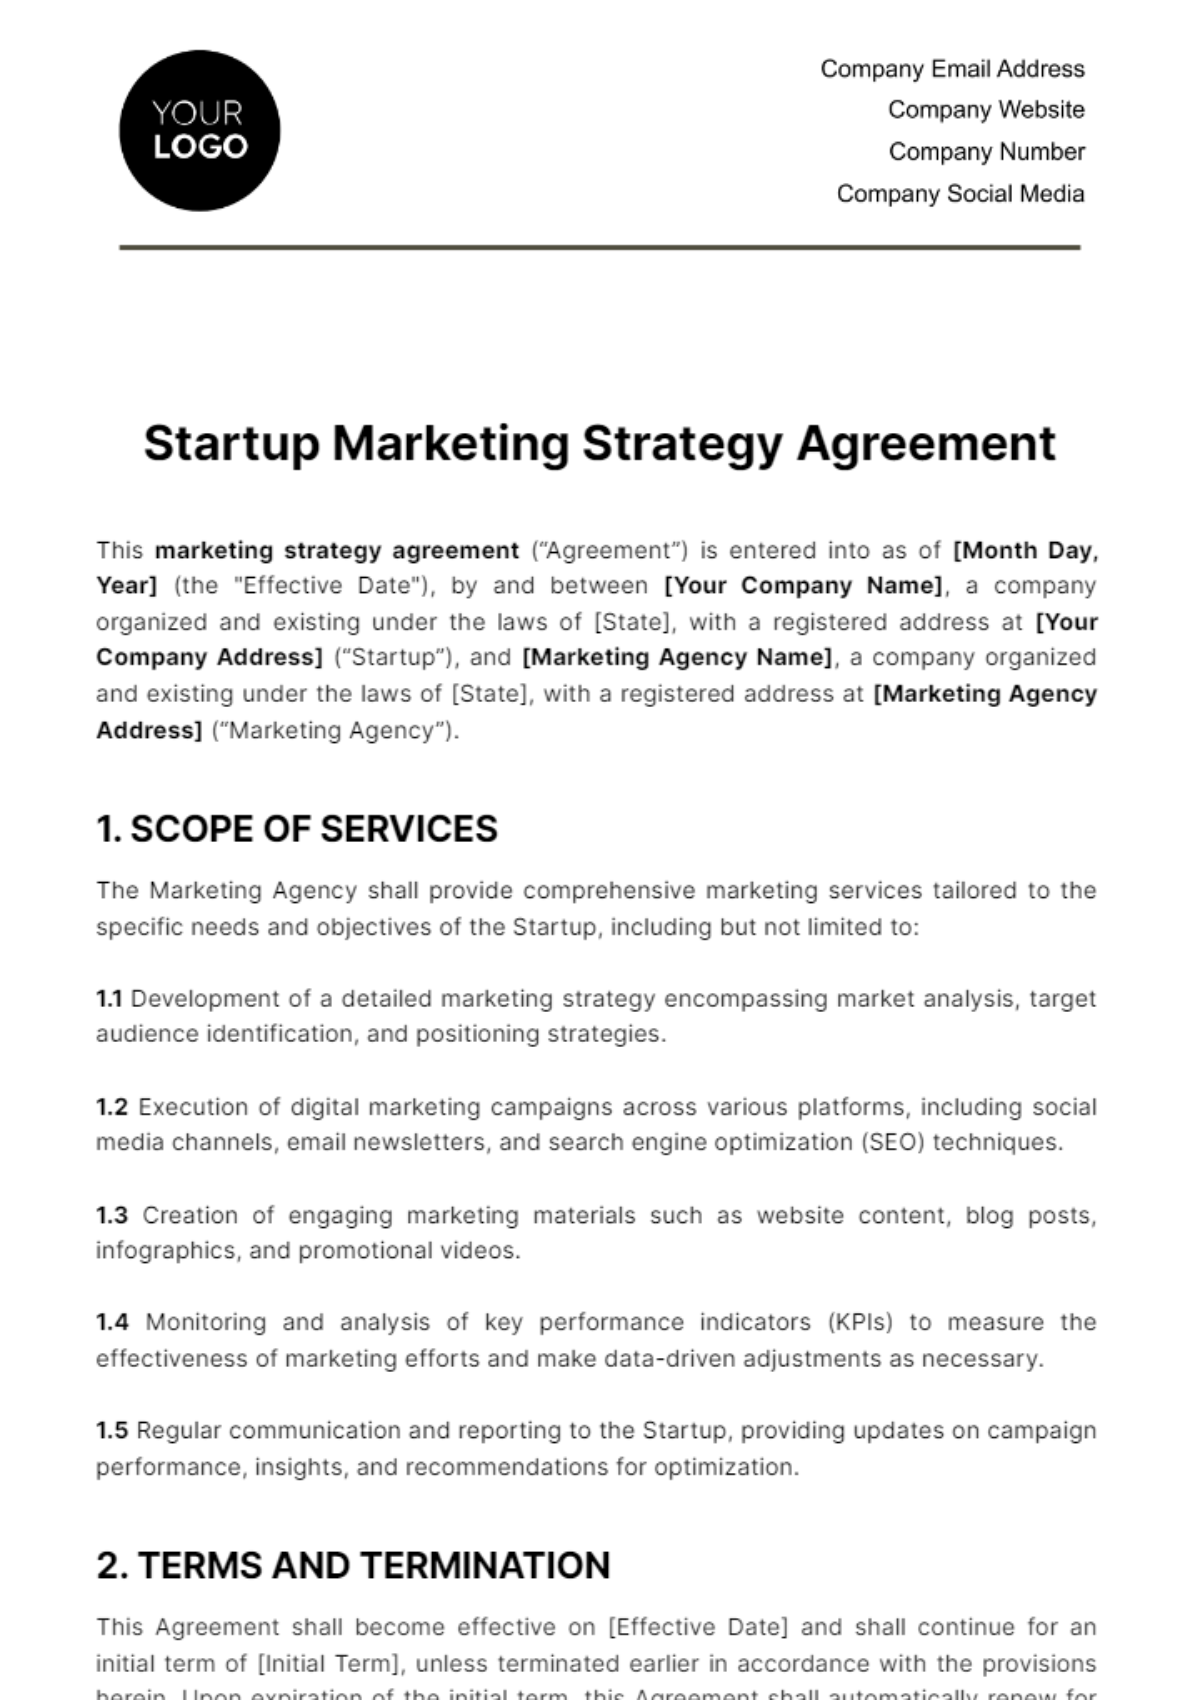 Free Startup Marketing Strategy Agreement Template